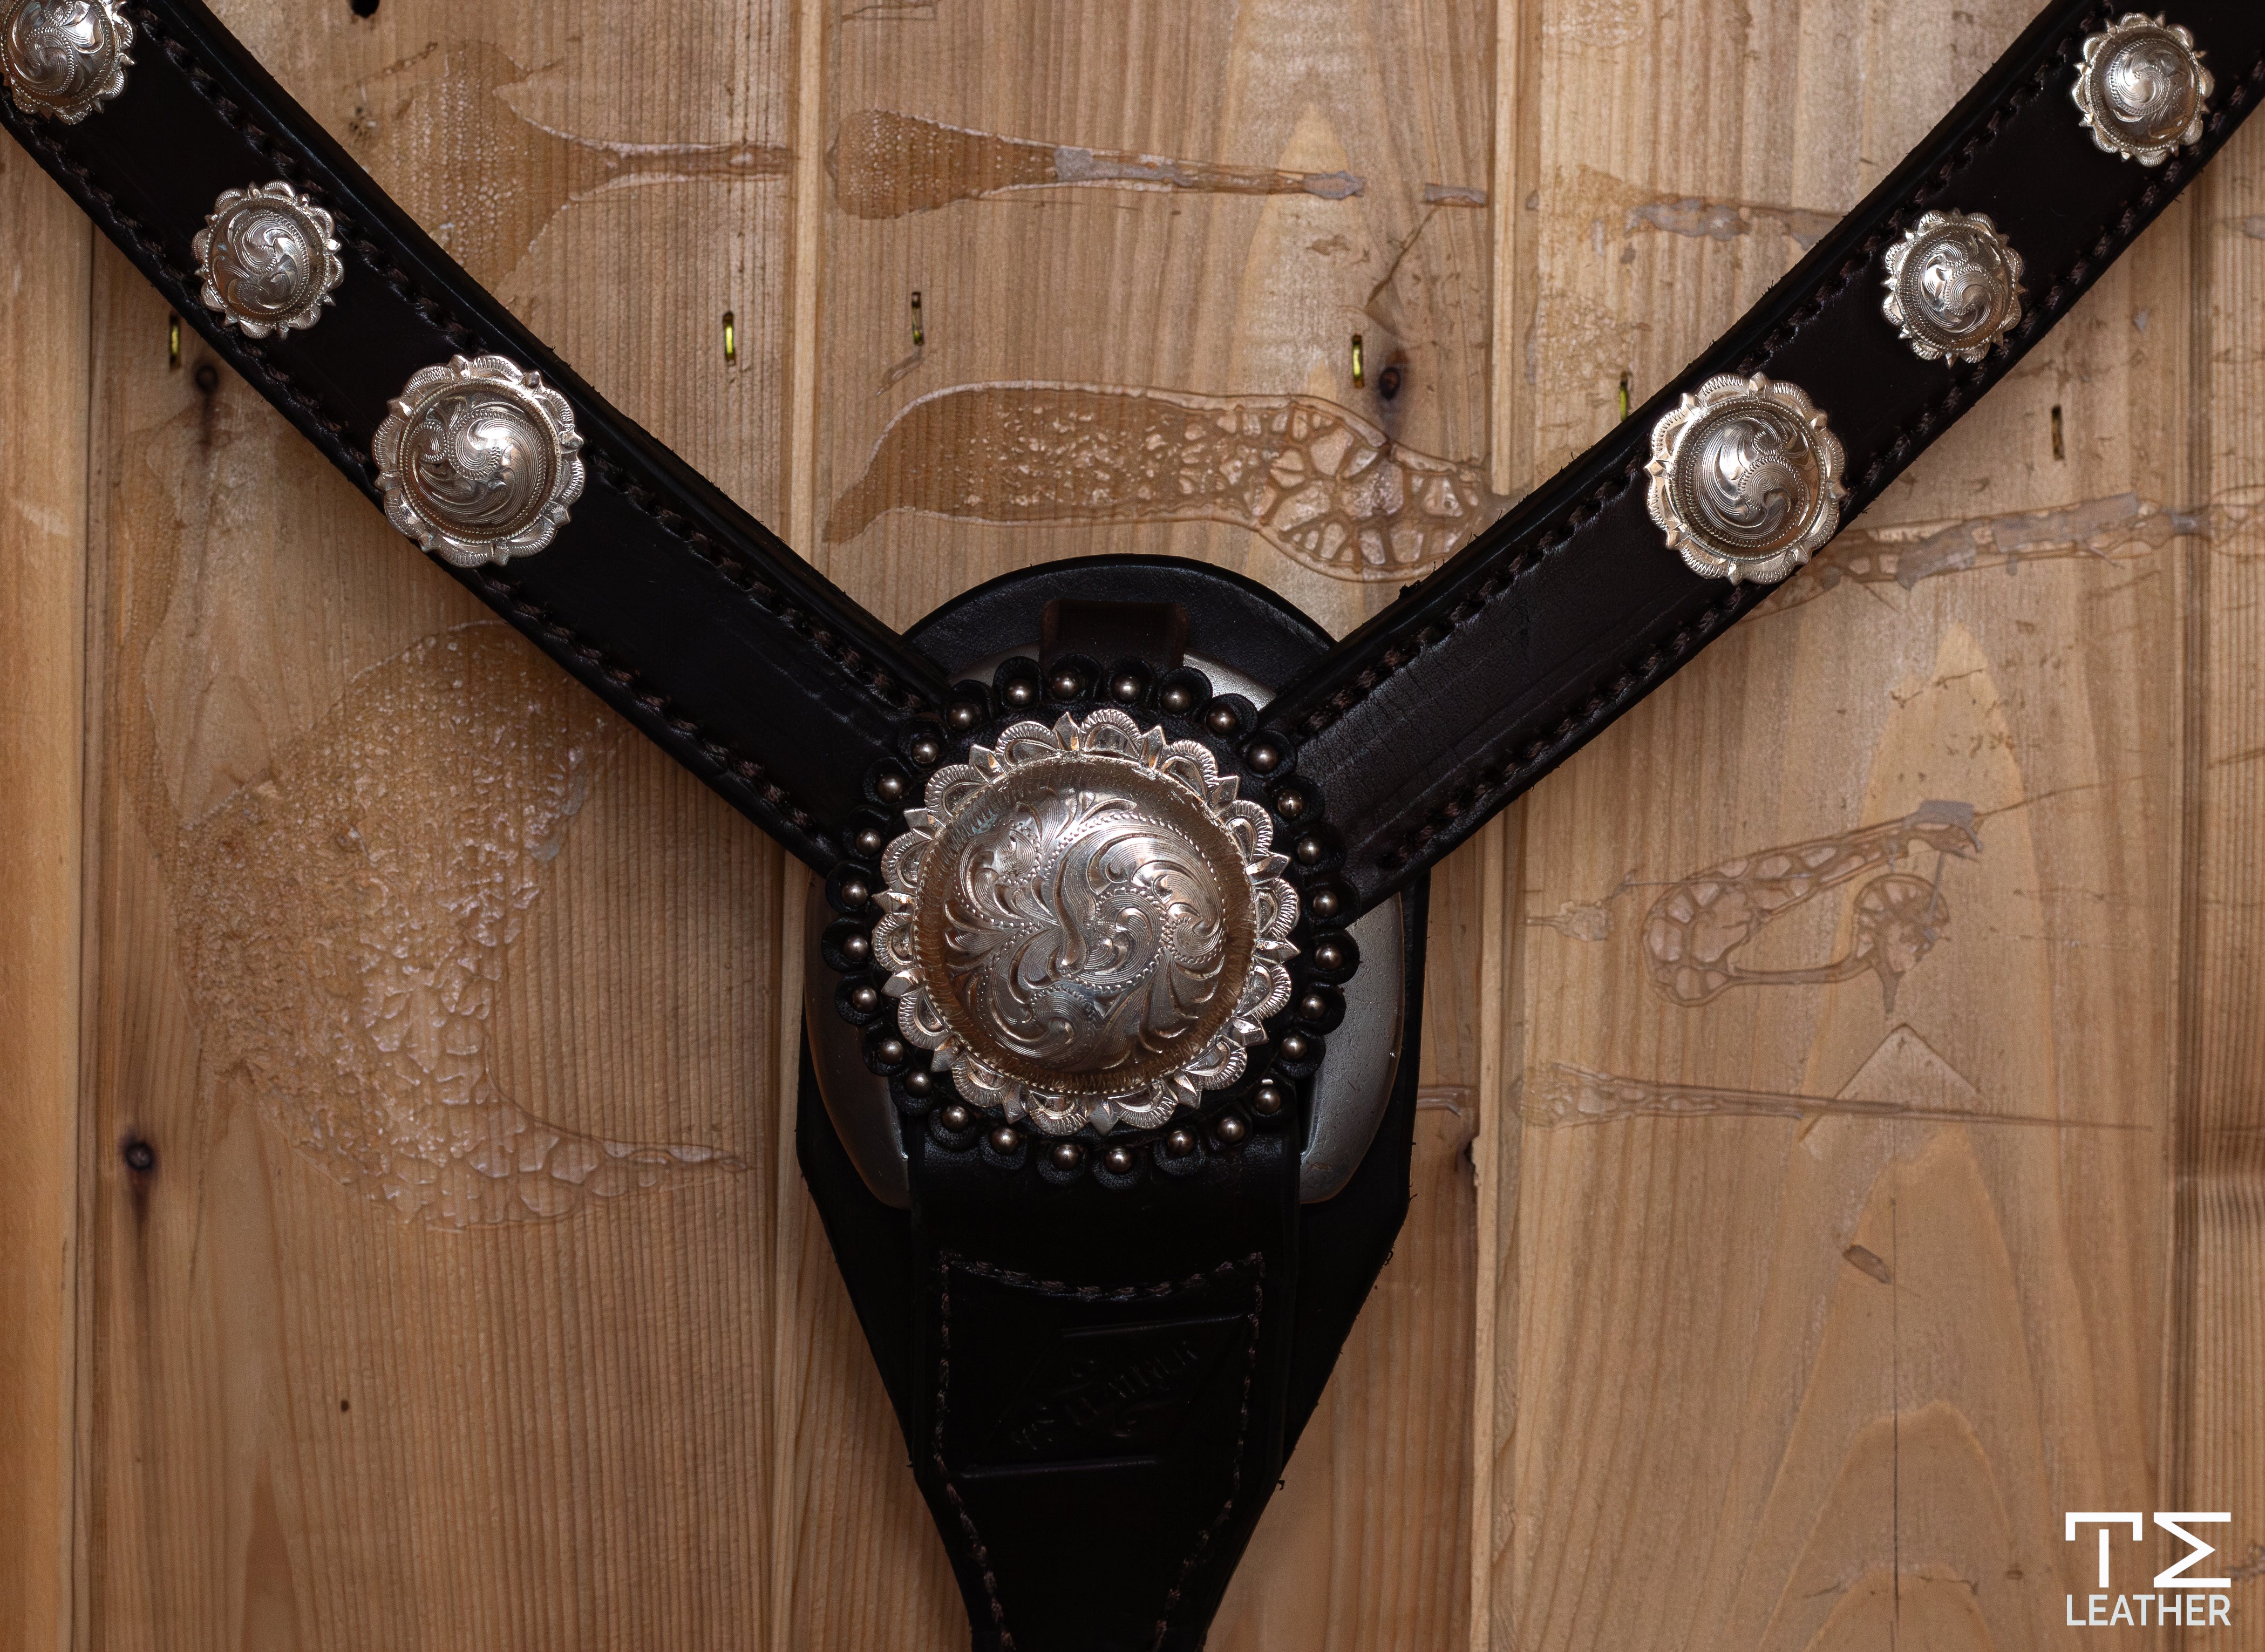 1" Chocolate Breast Collar w/ Engraved Silver Plated 7 Graduating Scalloped Round Raised Conchos